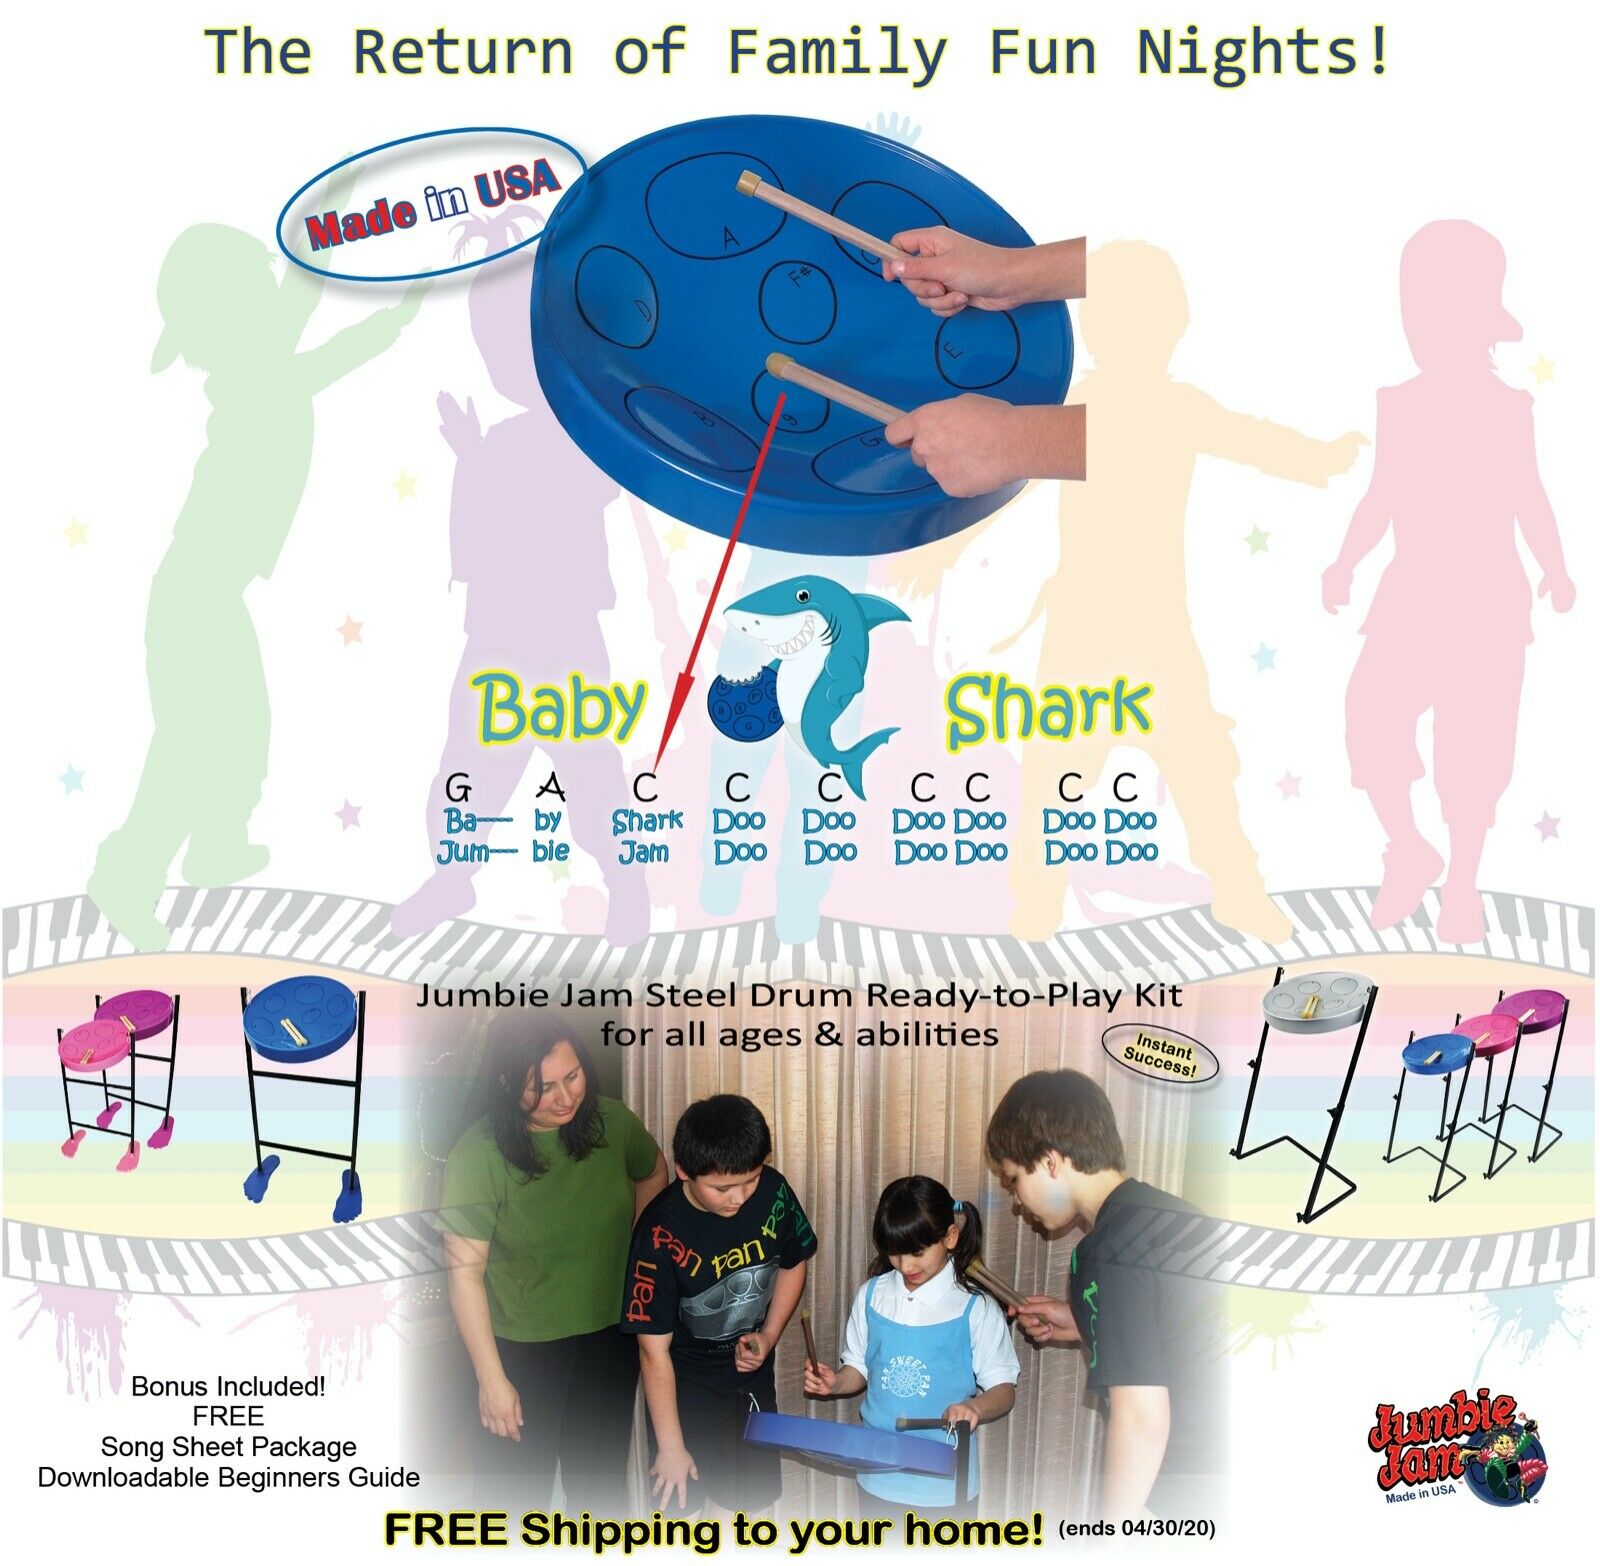 mini Steel Drum, from the world leader in PAN "Jumbie" ----GREAT HOLIDAY GIFT!